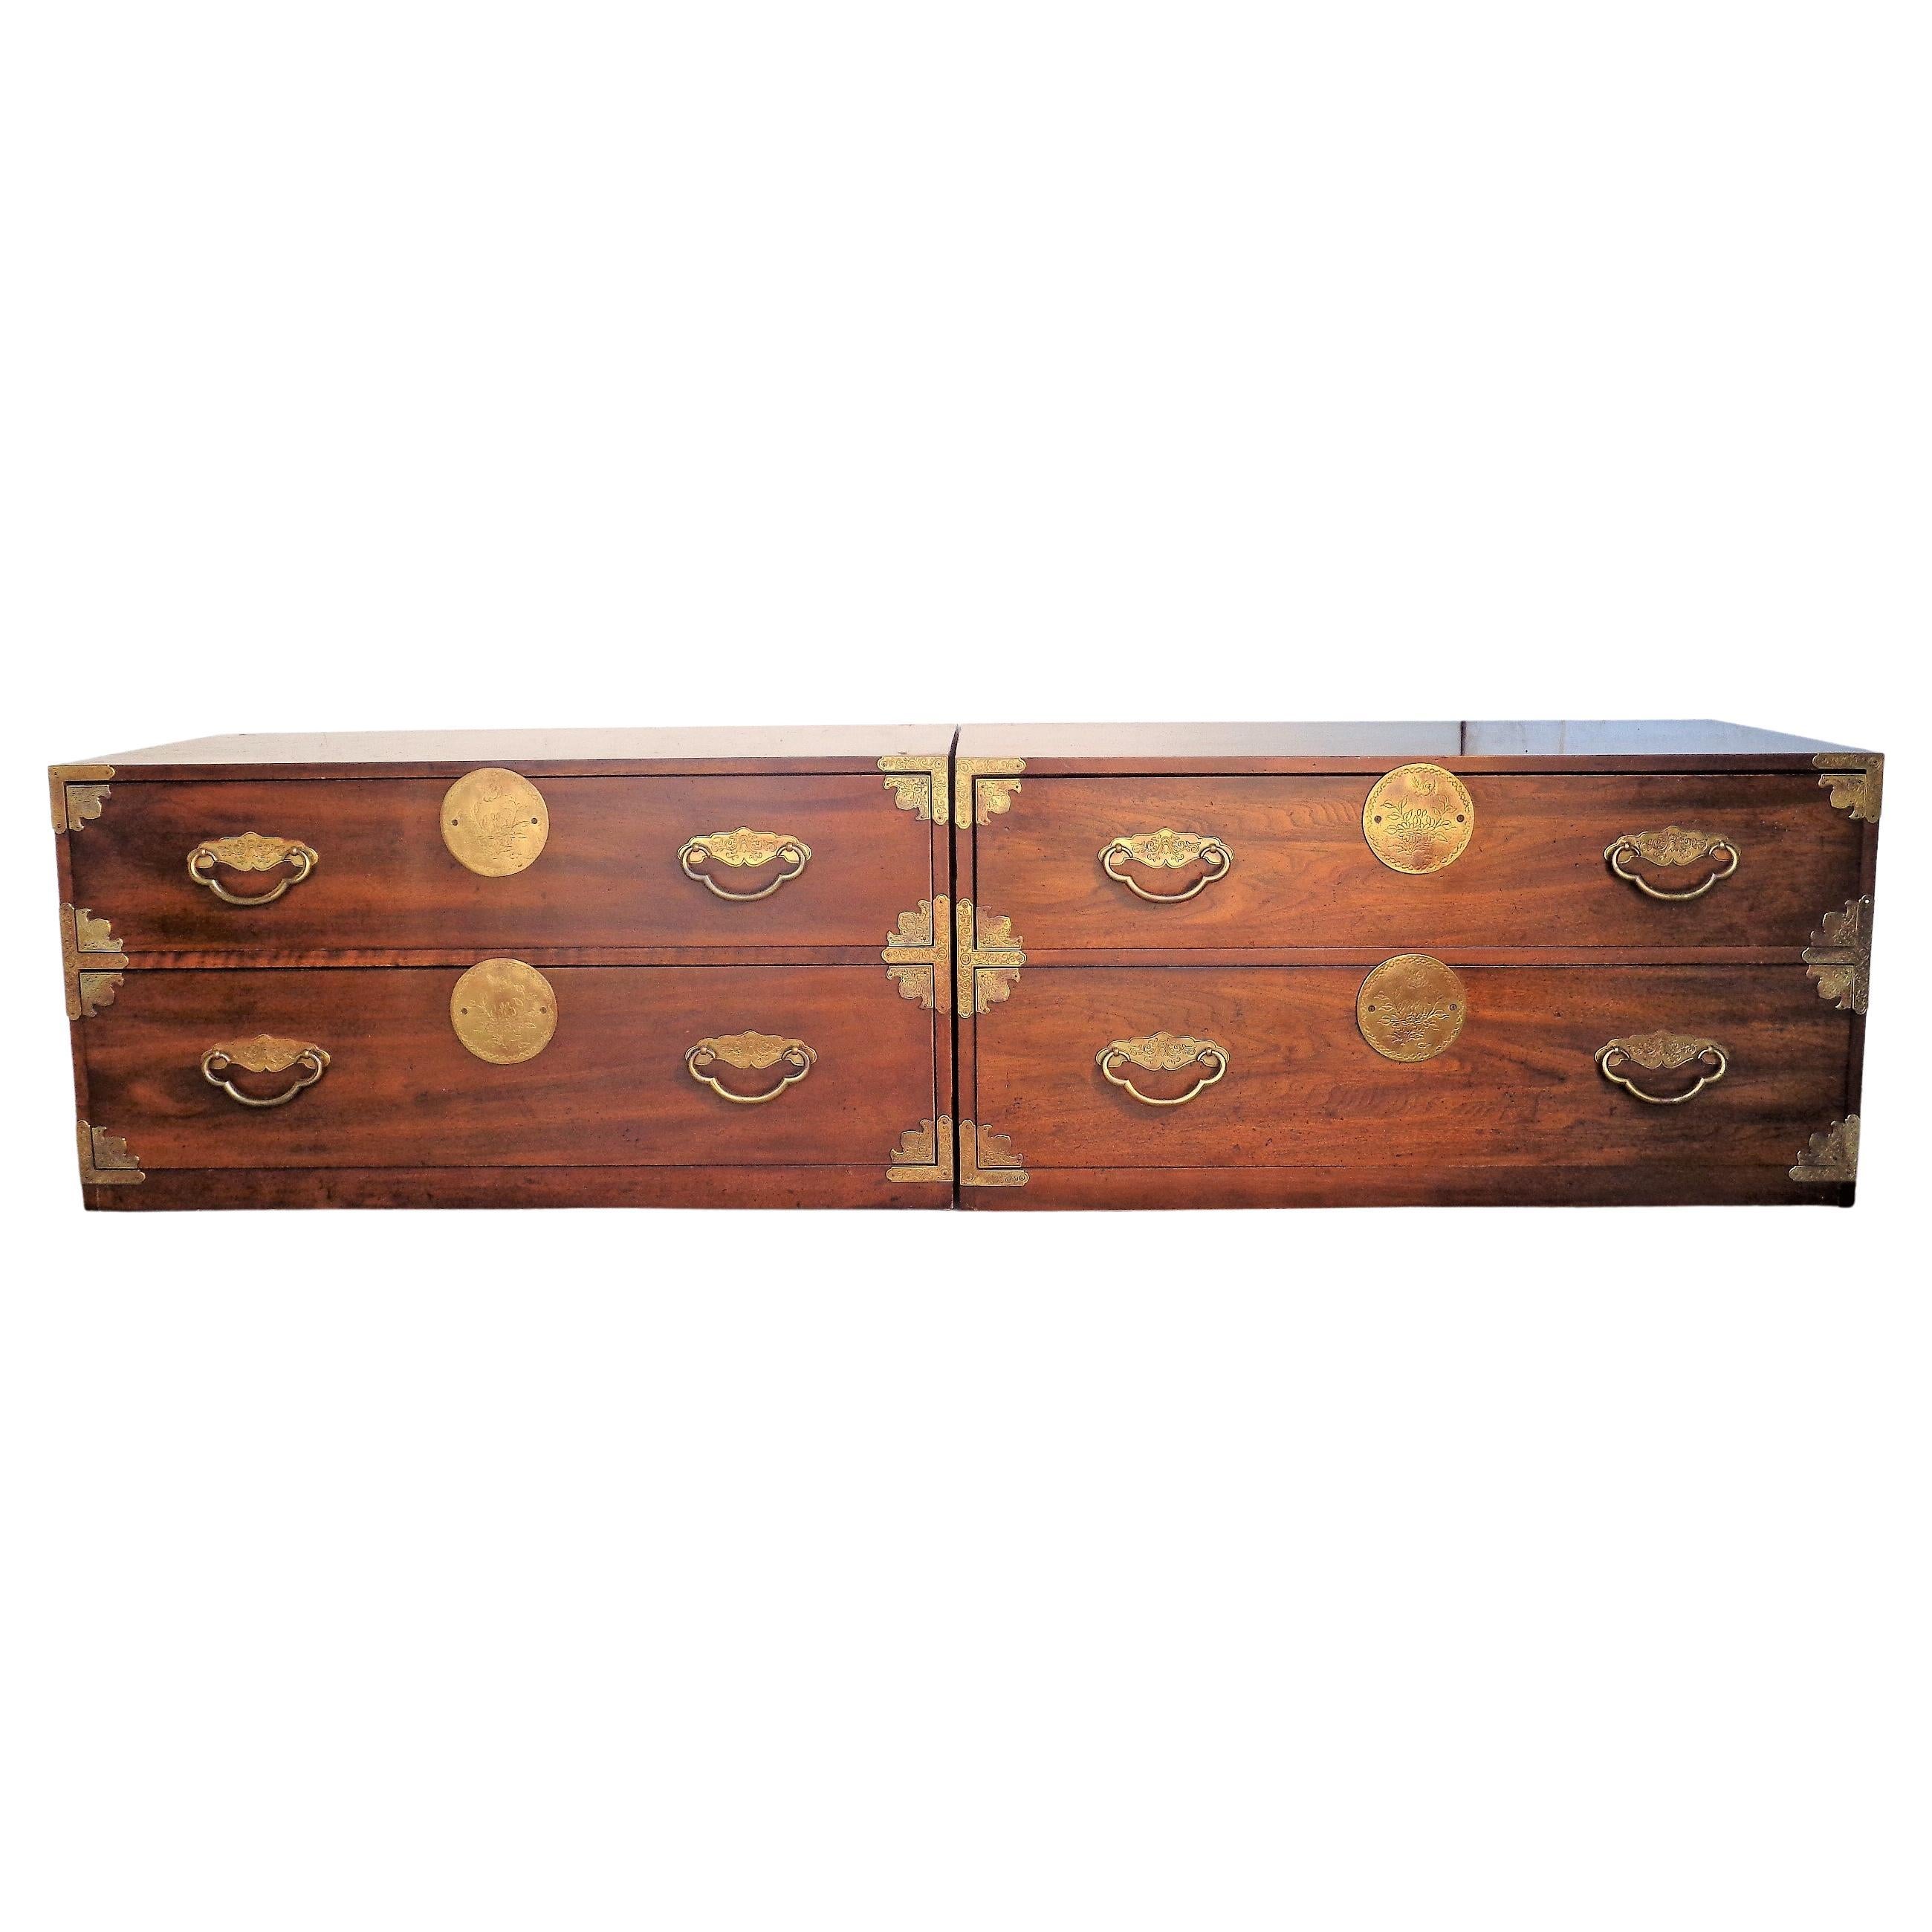 Asian Style Two Drawer Campaign Chests by Henredon, Circa 1970